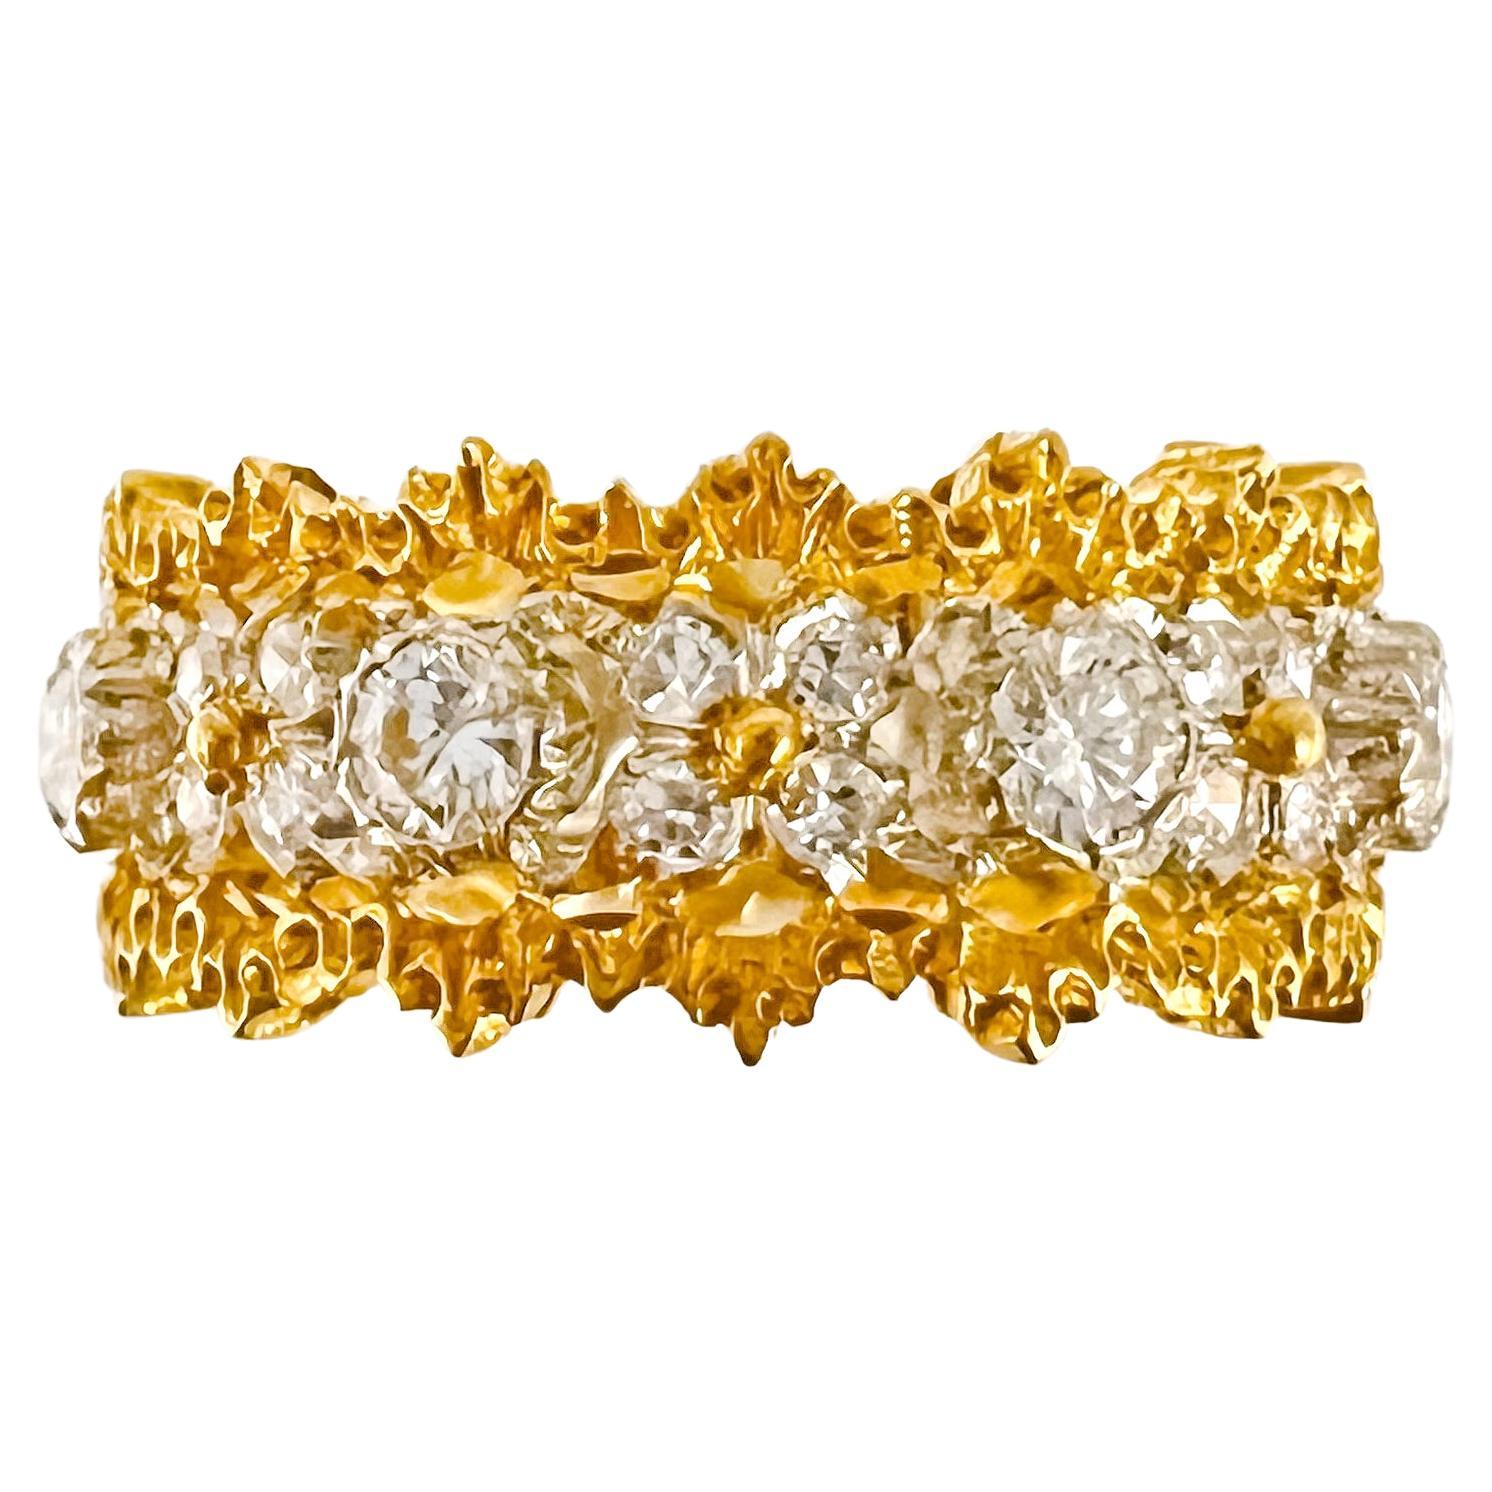 Buccellati 18k yellow and white gold diamond 'Eternelle' band ring.  Yellow gold engraved border with a pierced, cut-out design white gold center having eight larger bezel set diamonds and thirty-two smaller round brilliant-cut diamonds weighing